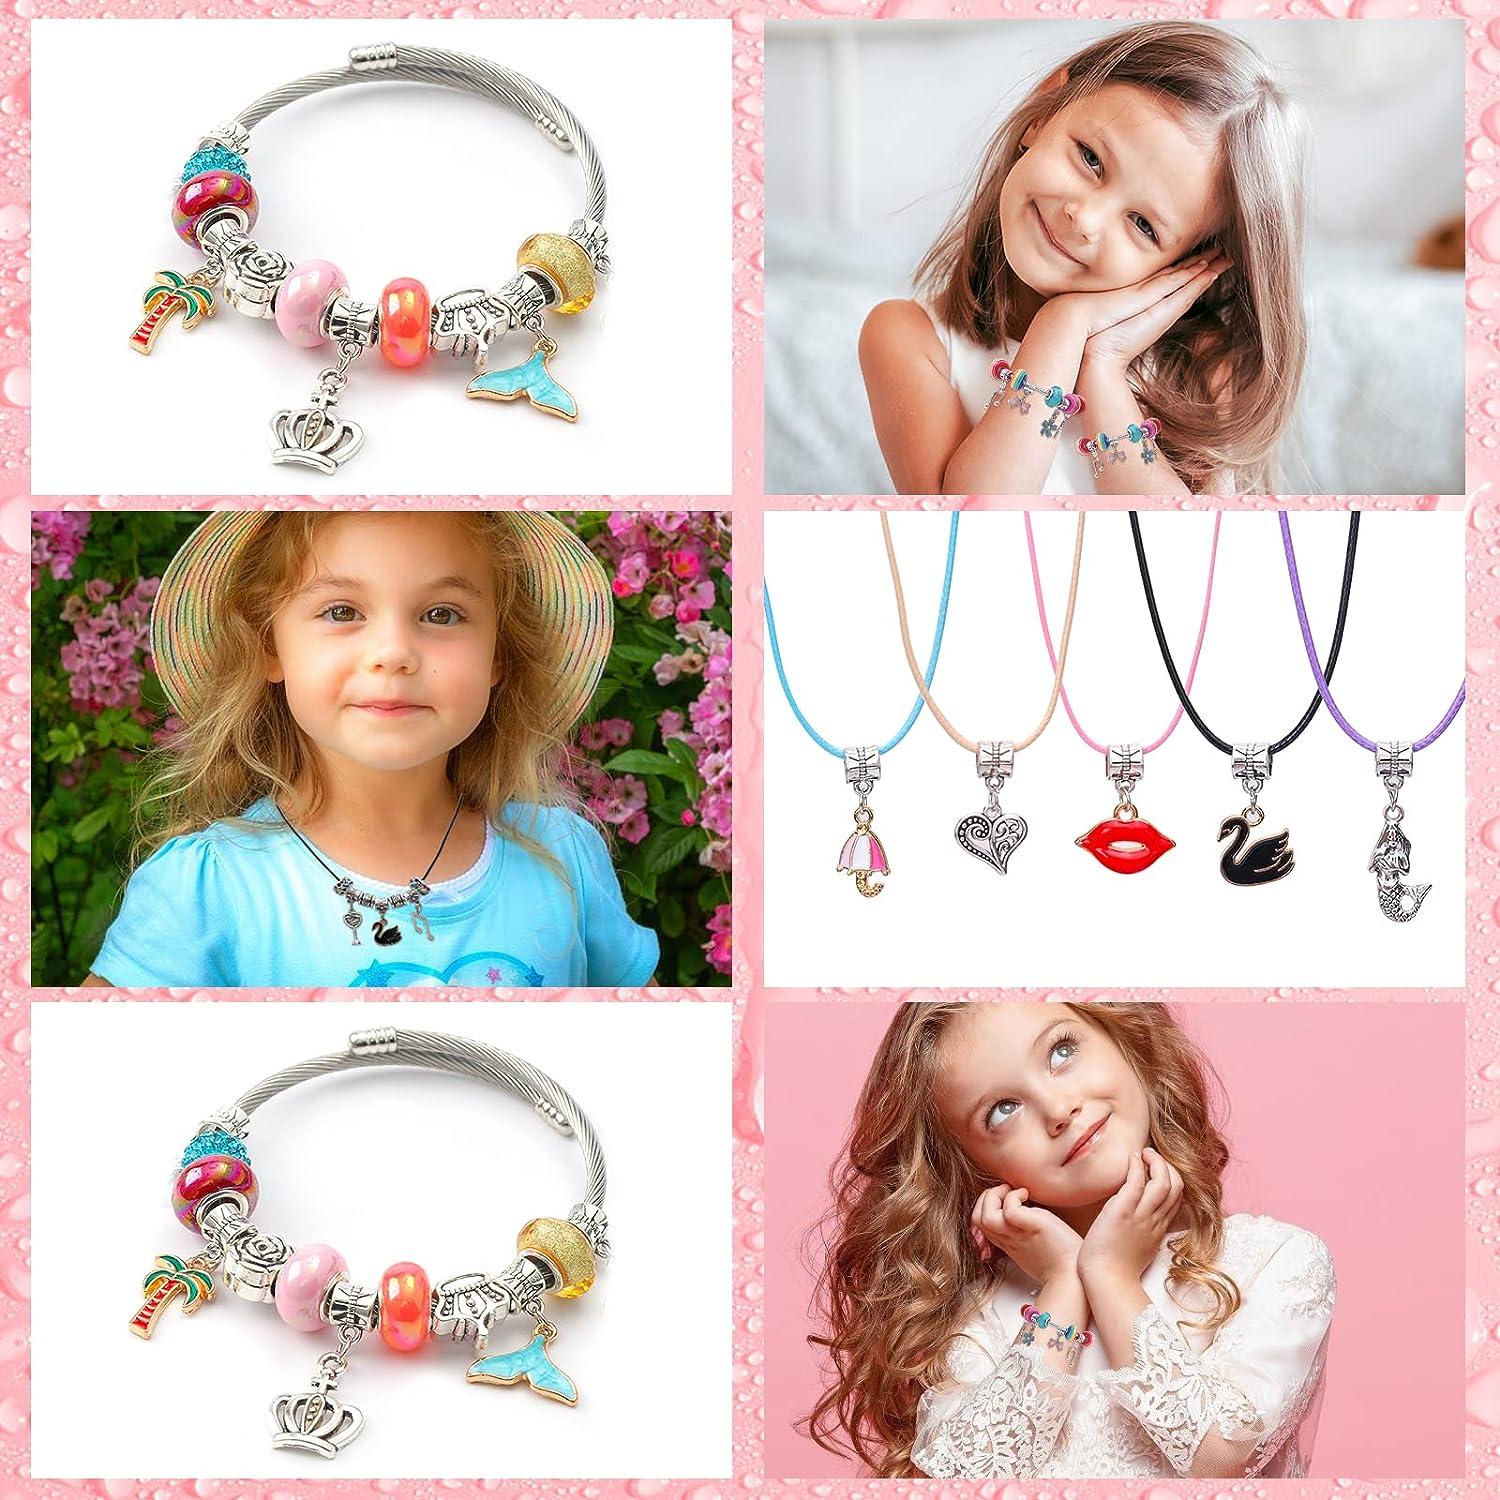 Charm Bracelet Jewelry Making Kit With Beads Bracelets Charms Necklace Diy  Crafts Gifts Set For Teen Girls Kids